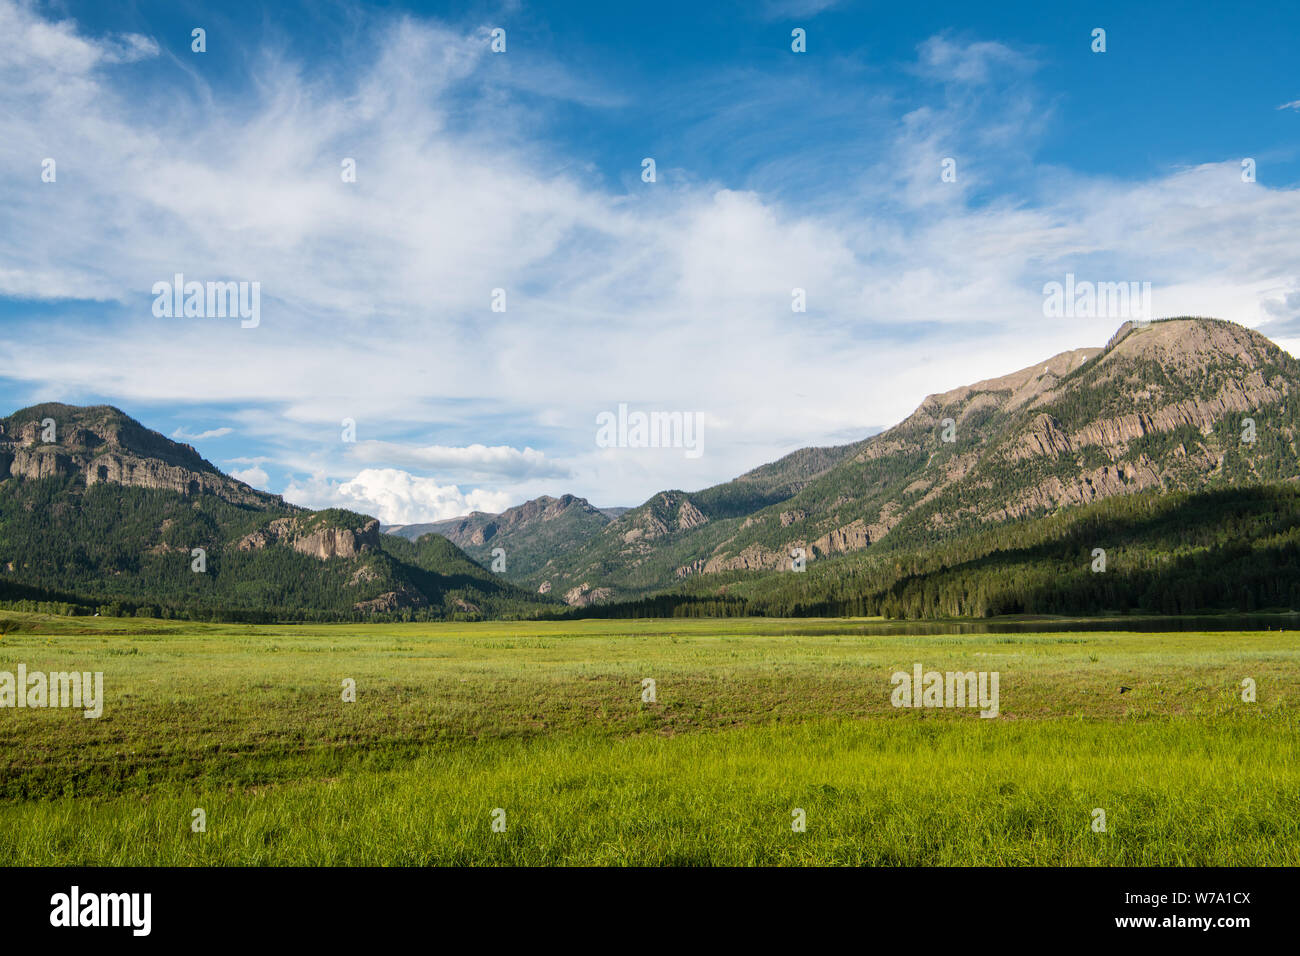 Grassy meadow surrounded by high mountain peaks under a beautiful blue sky with white clouds - Rocky Mountains near Pagosa Springs, Colorado Stock Photo